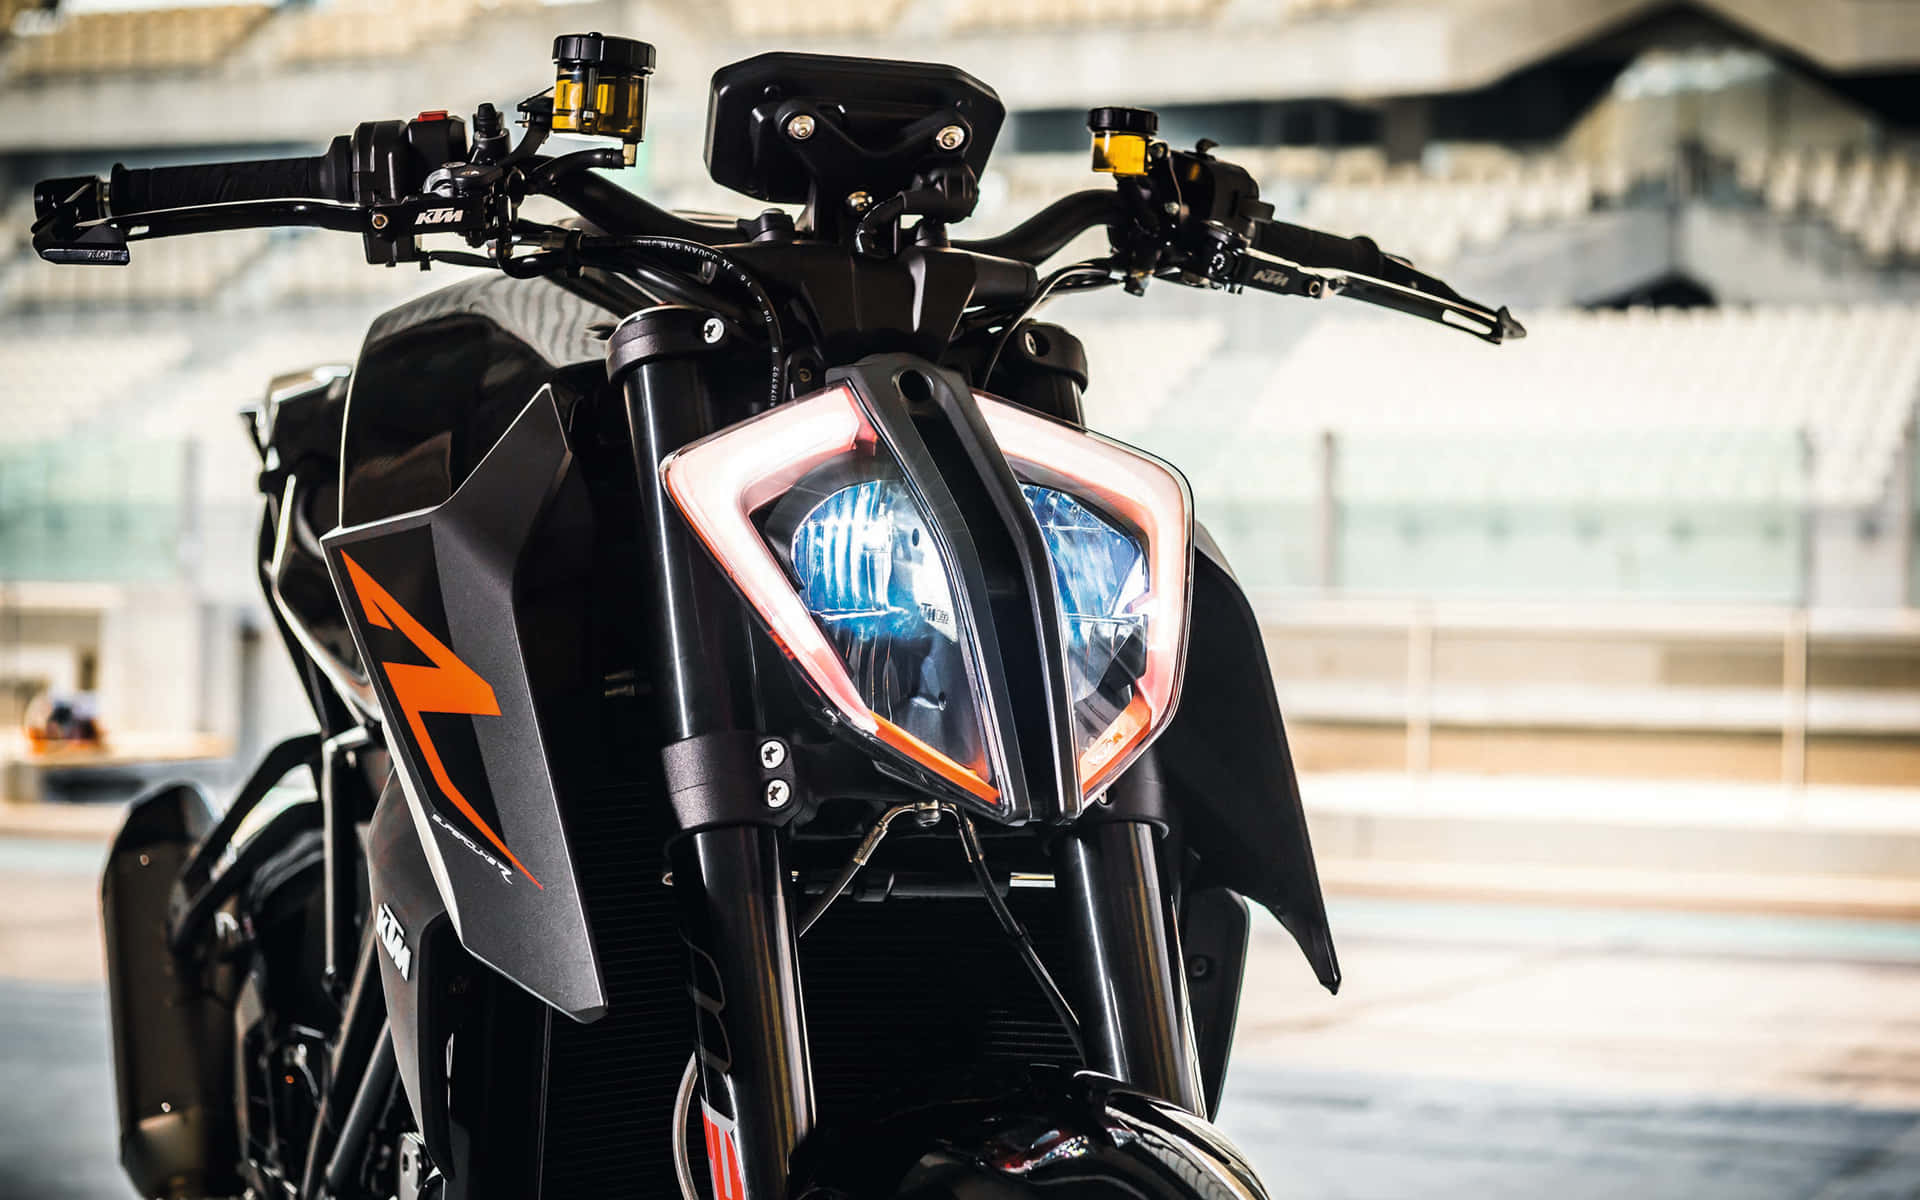 Power up with the performance of KTM Bike